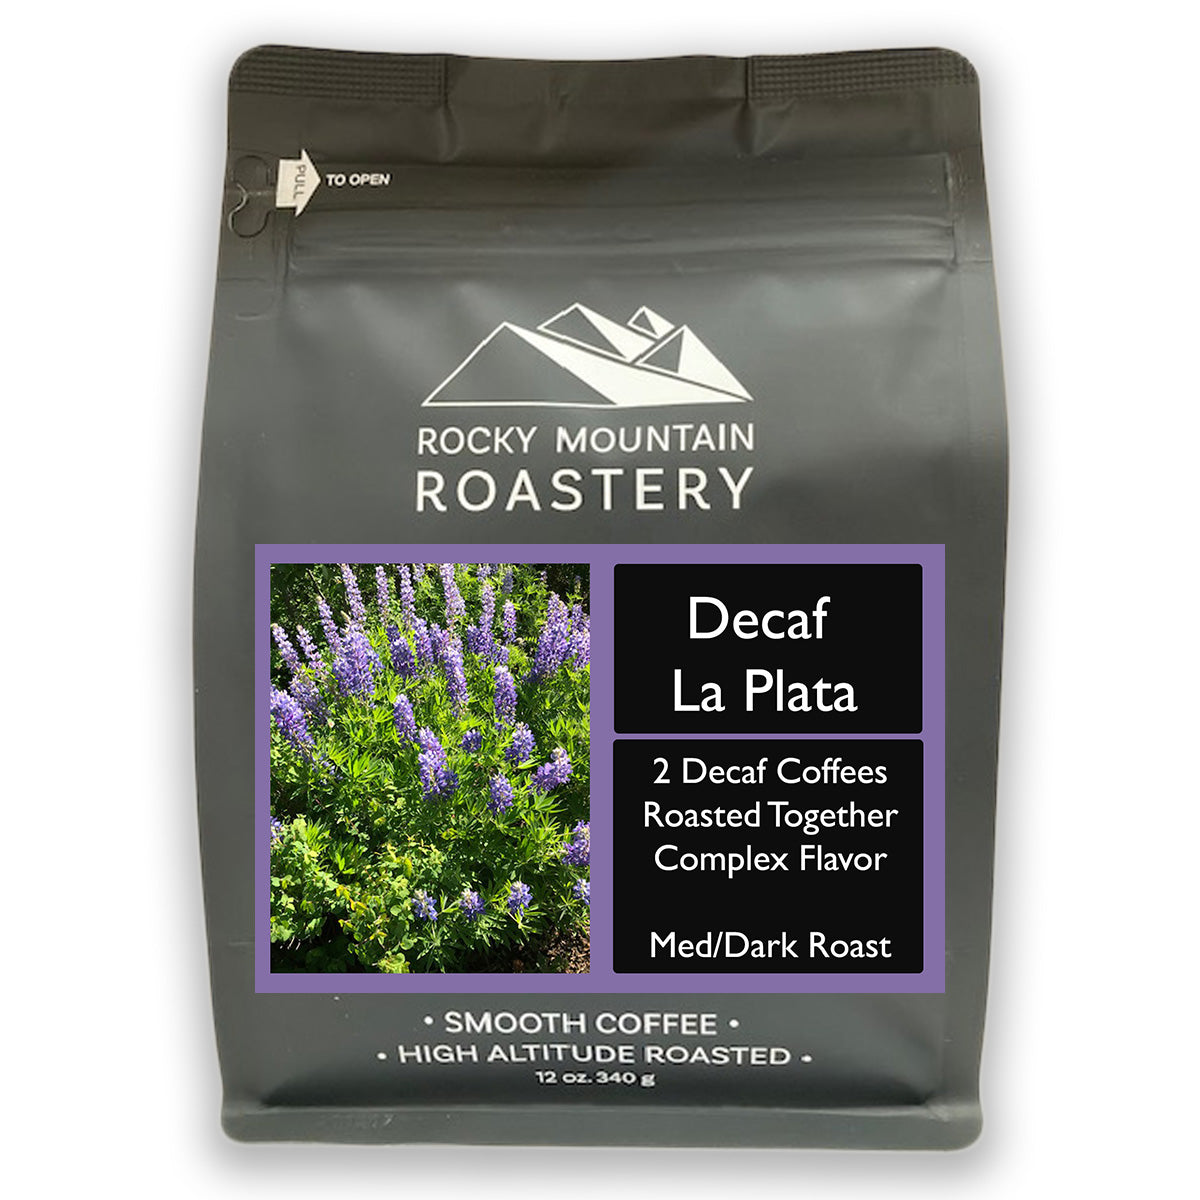 Picture of a bag of Decaf La Plata Coffee